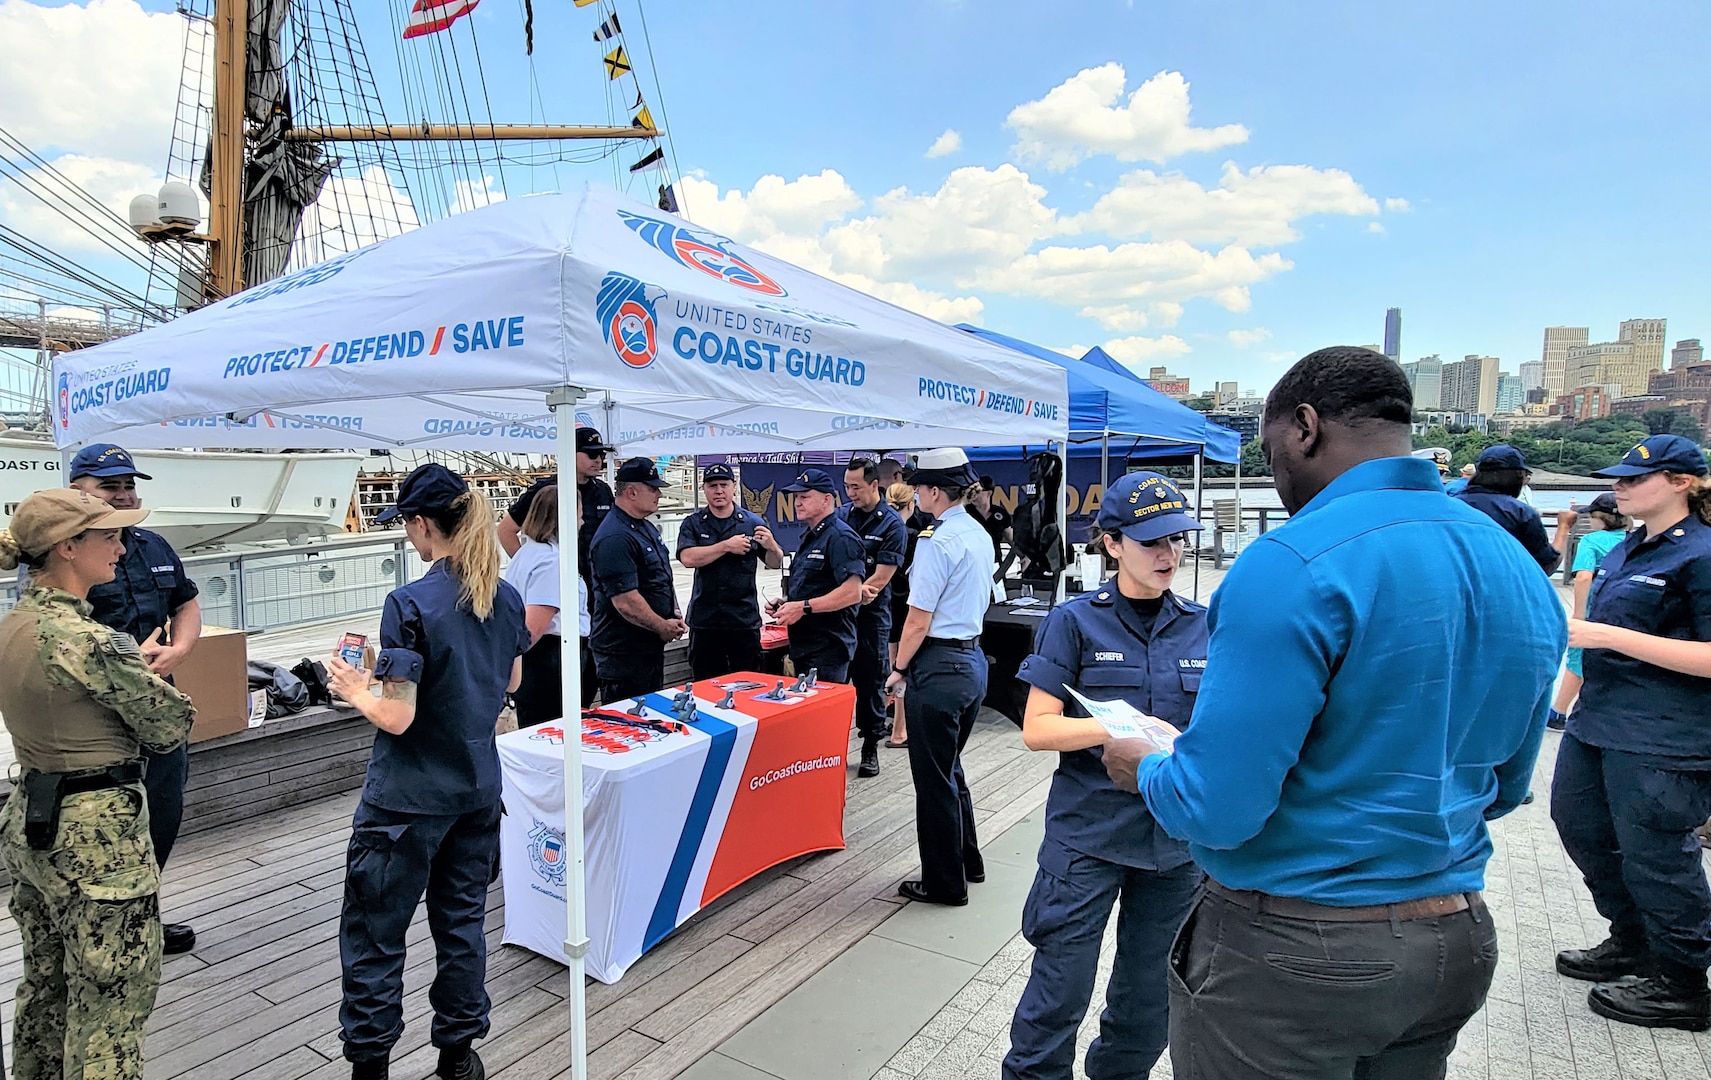 Coast Guard crews held a recruiting bonanza on Pier 17 South Street Seaport during the Baroque Eagle’s visit in late July. Events included a harbor welcome parade flyover, public tours, and a search and rescue demonstration by Station New York and Air Station Atlantic City. (U.S. Coast Guard photo.)